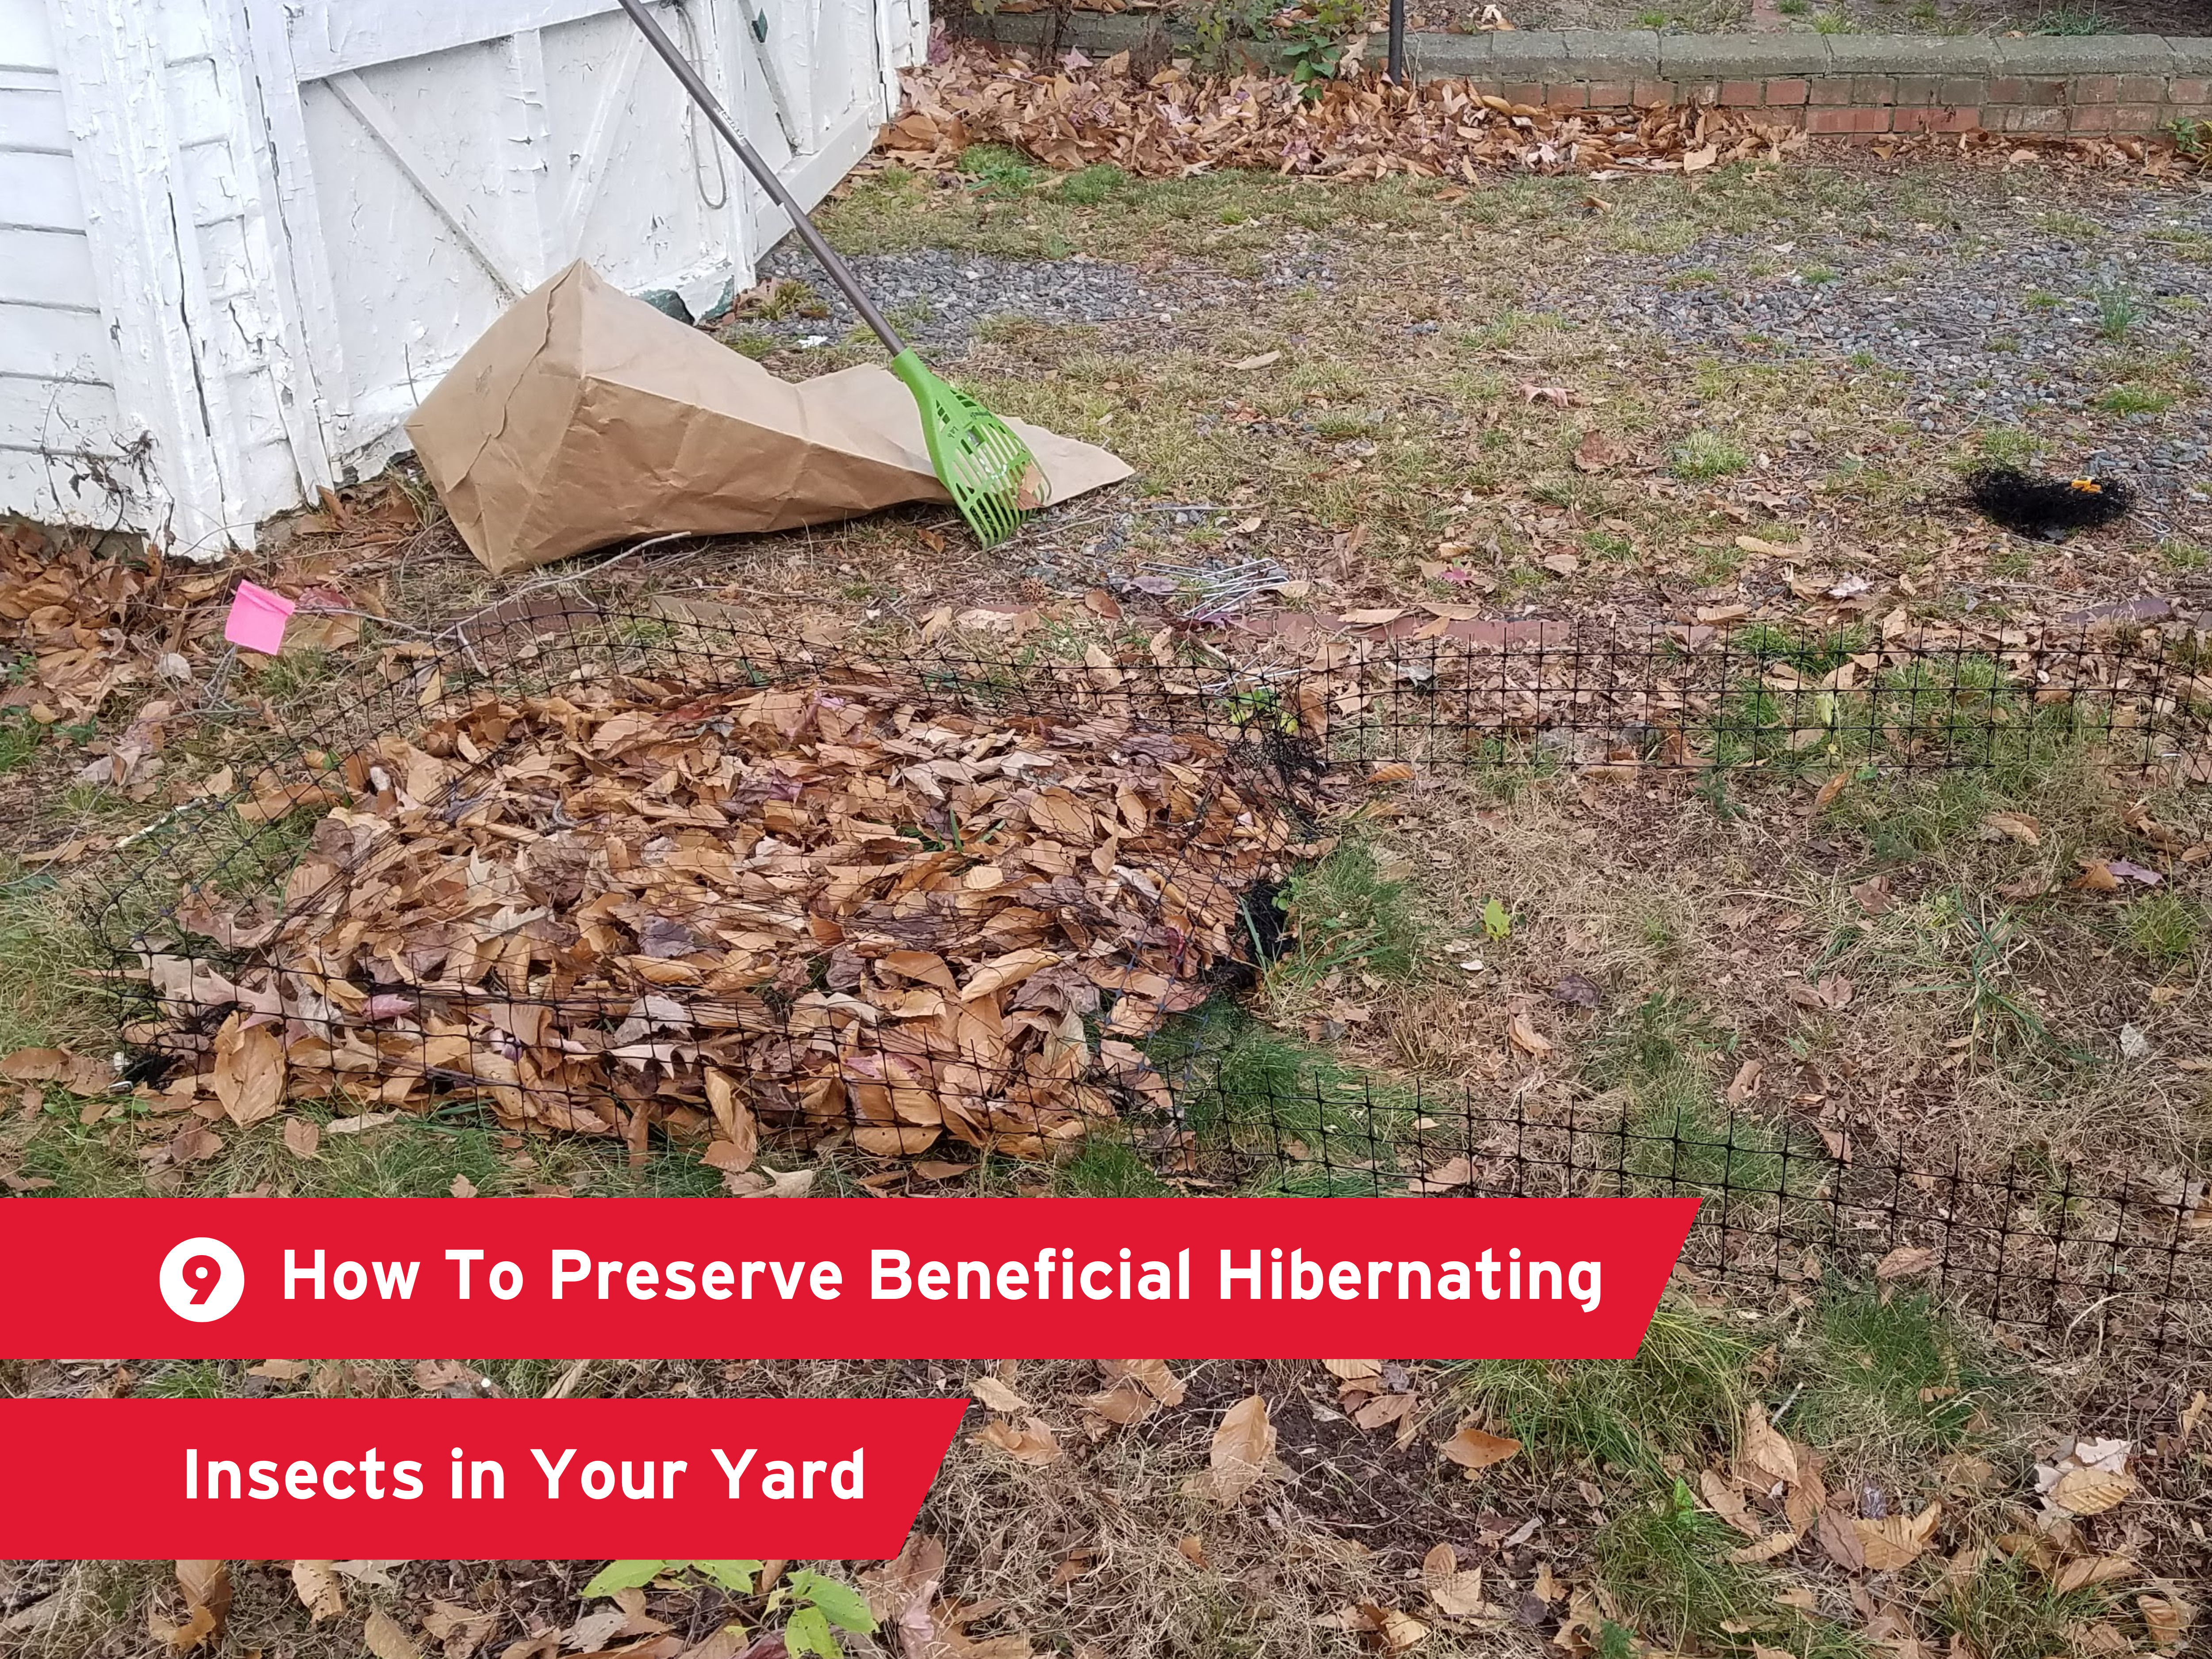 "How To Preserve Beneficial Hibernating Insects in Your Yard" over a background showing a raked leaf pile